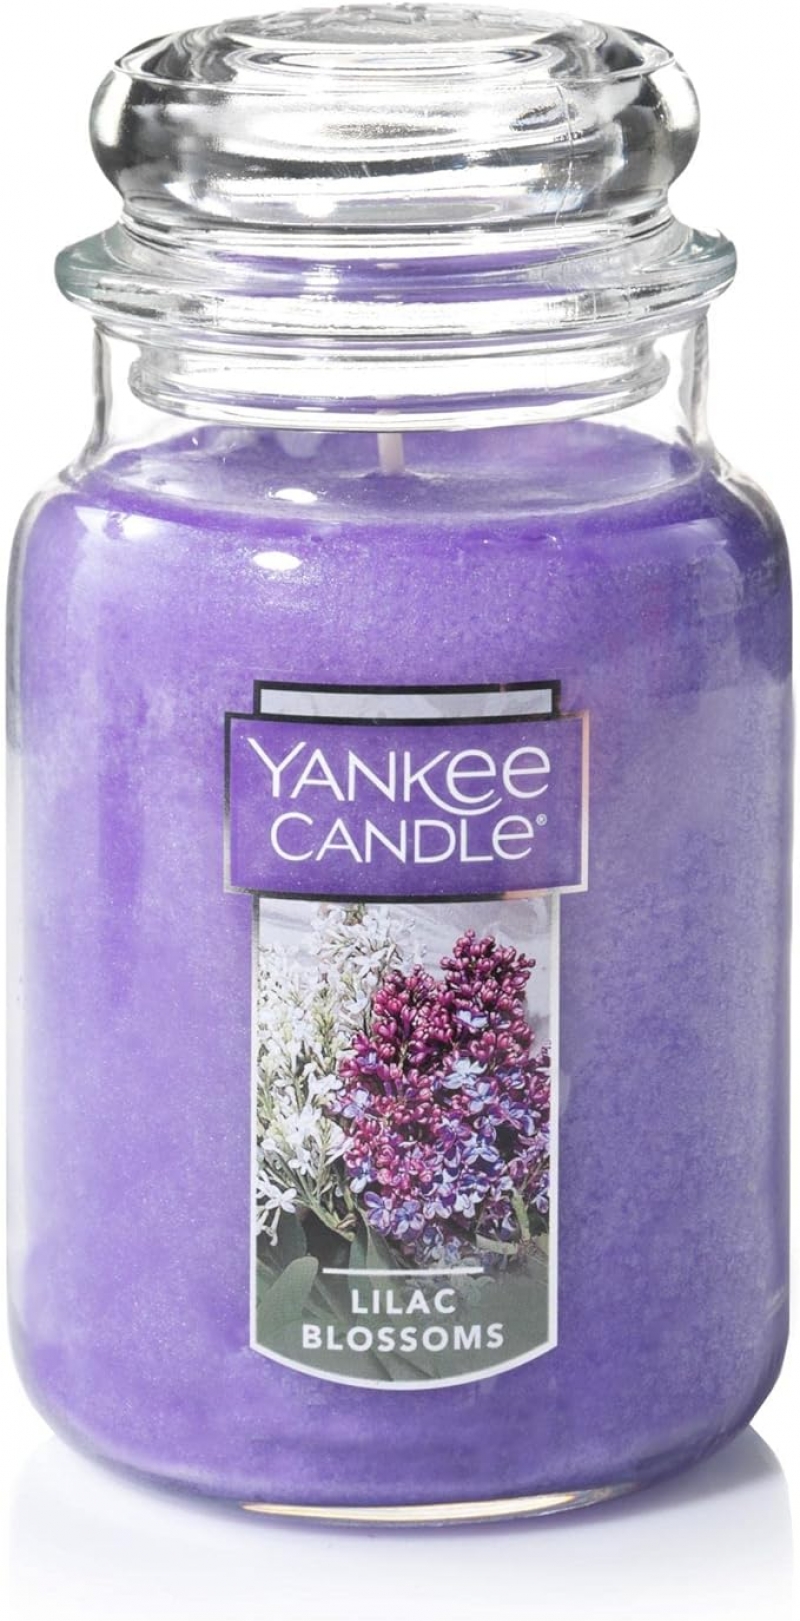 ihocon: Yankee Candle Lilac Blossoms Scented, Classic 22oz Large Jar Single Wick Candle 大罐蠟燭